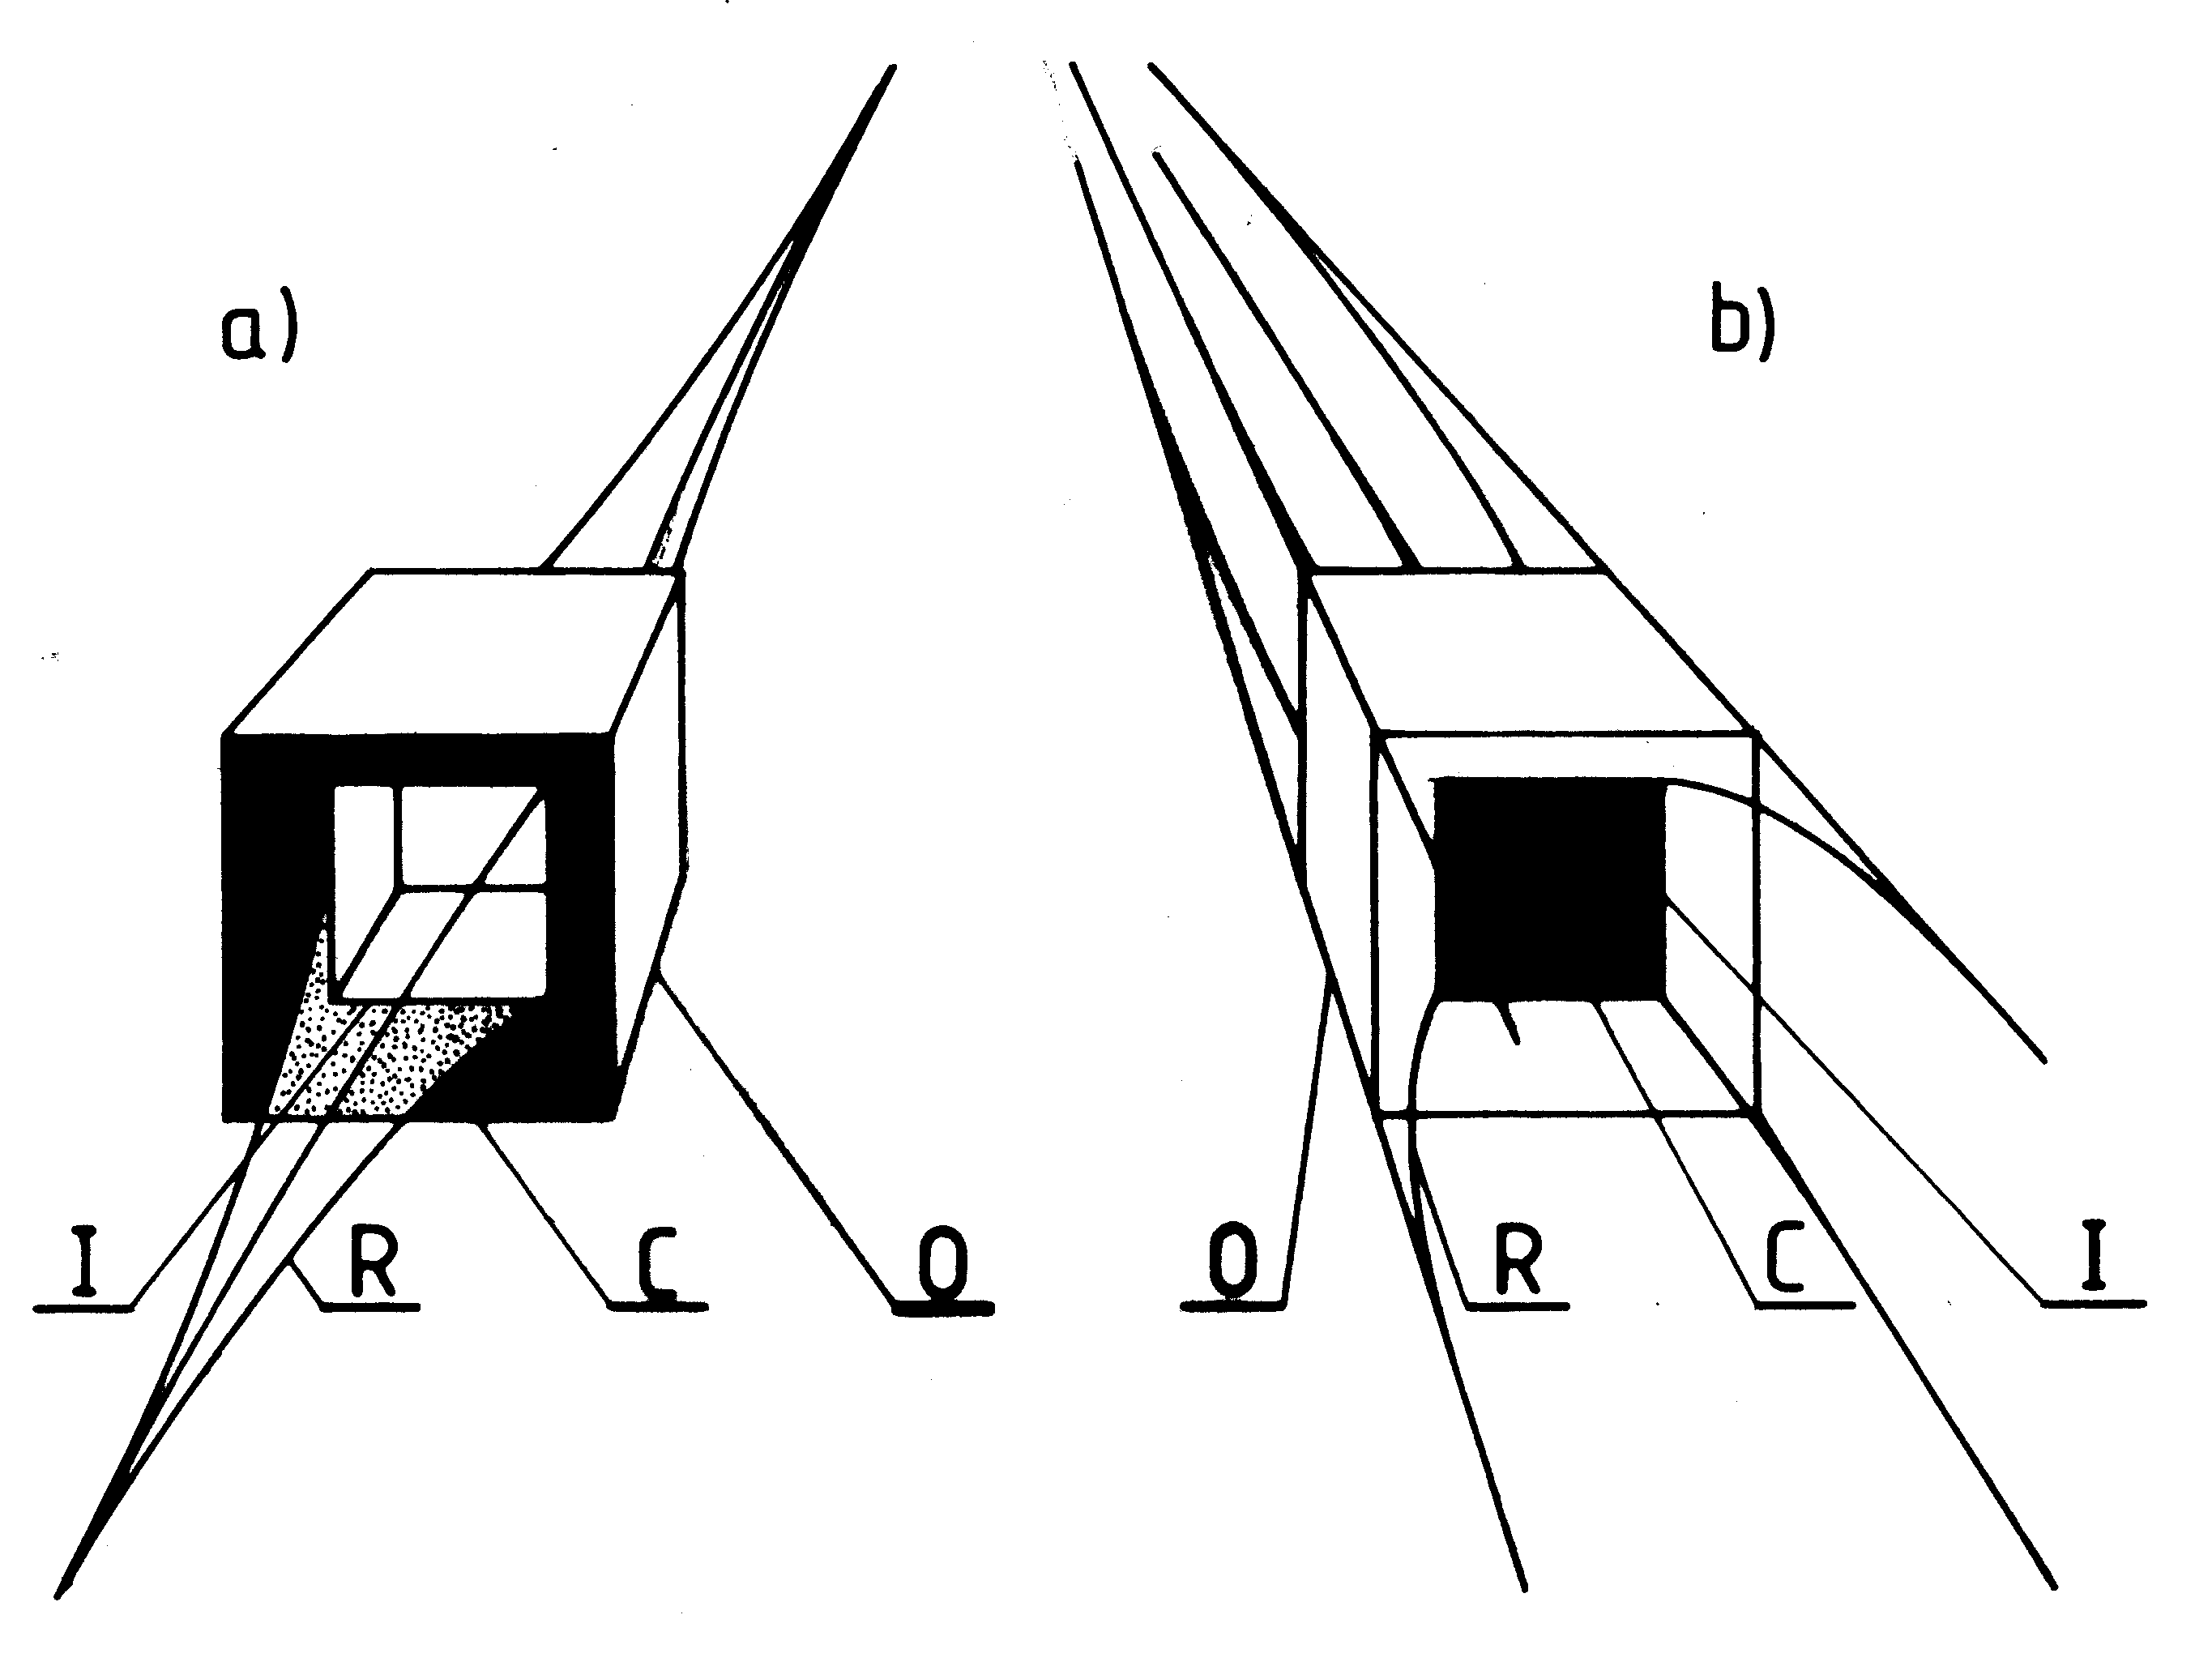 Appearance of outlets from Oscillatory Chambers